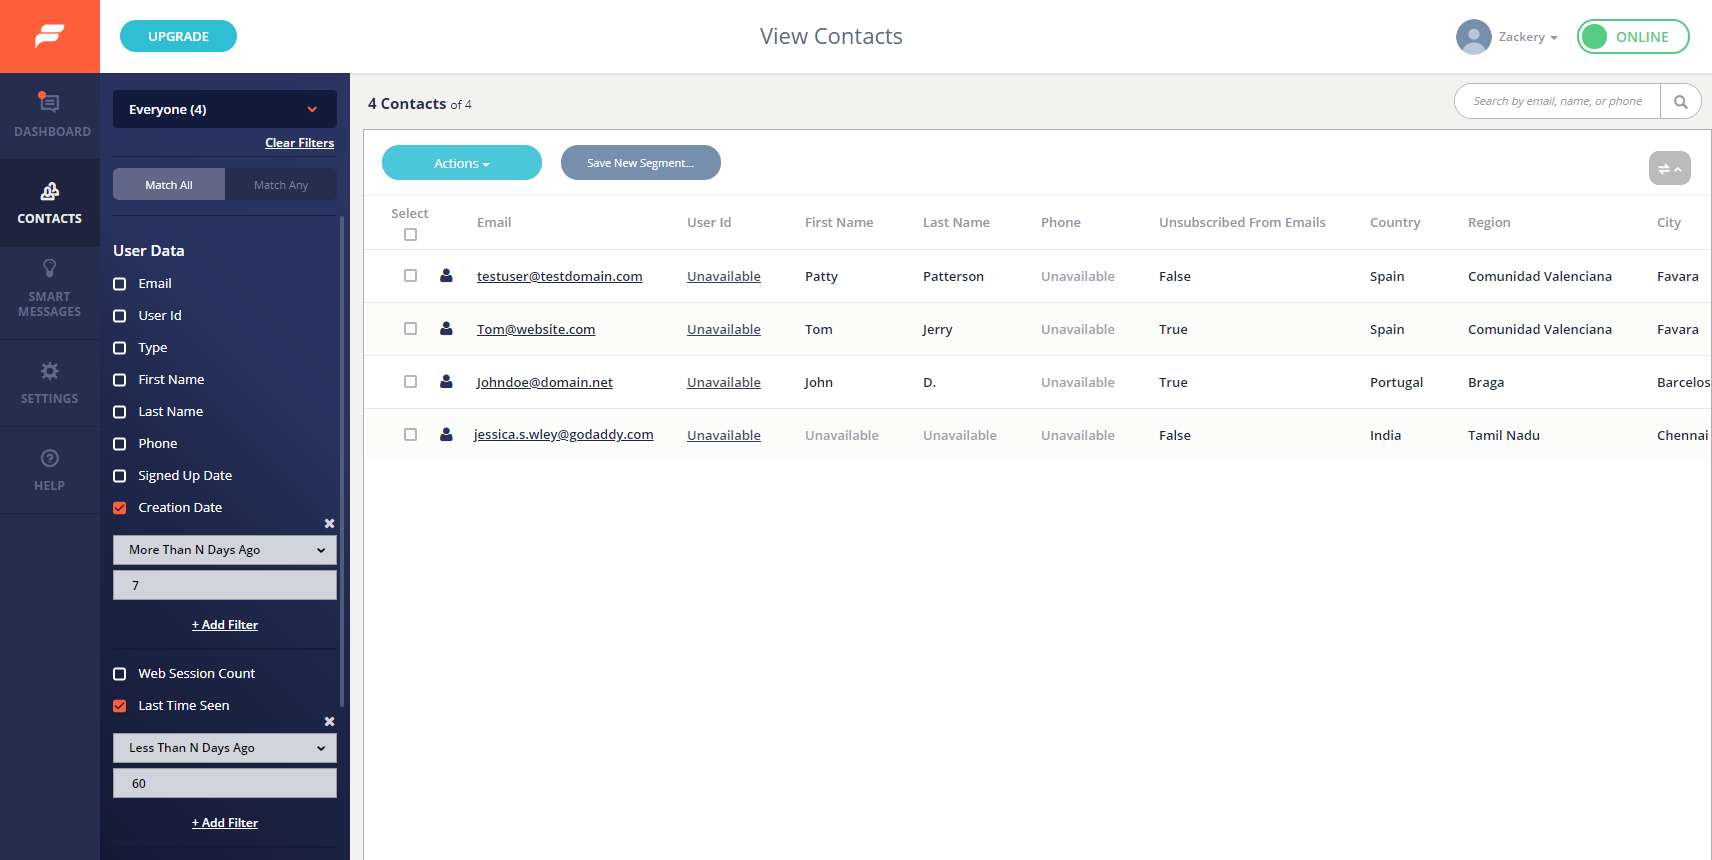 This is the Contacts screen where you can use super fast search and filtering options to find your contacts quickly.